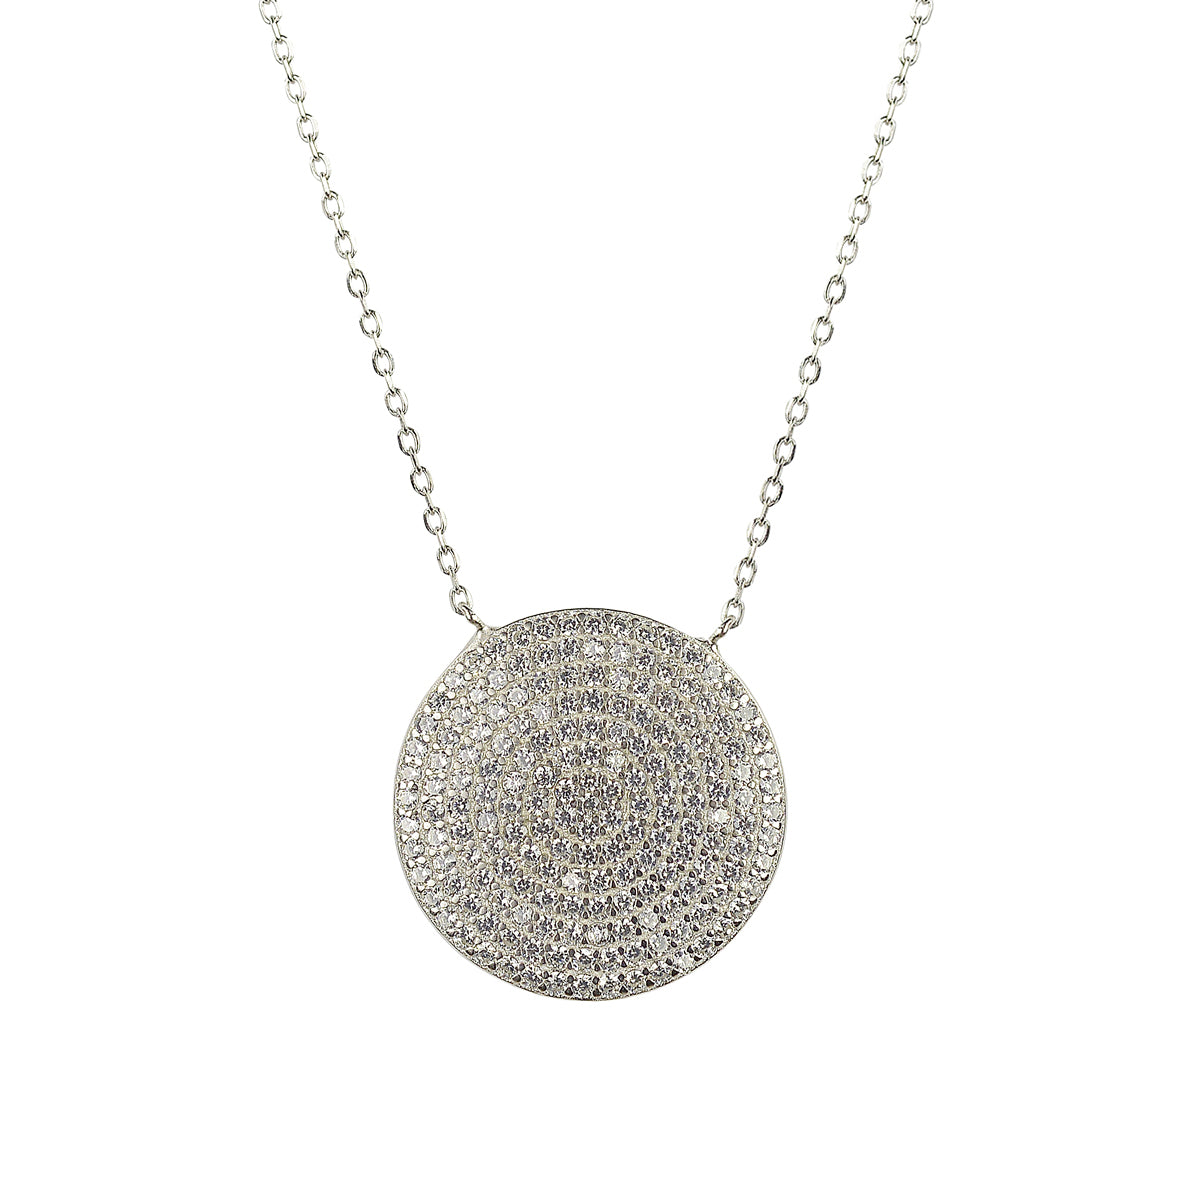 Disc necklace encrusted in crystals 